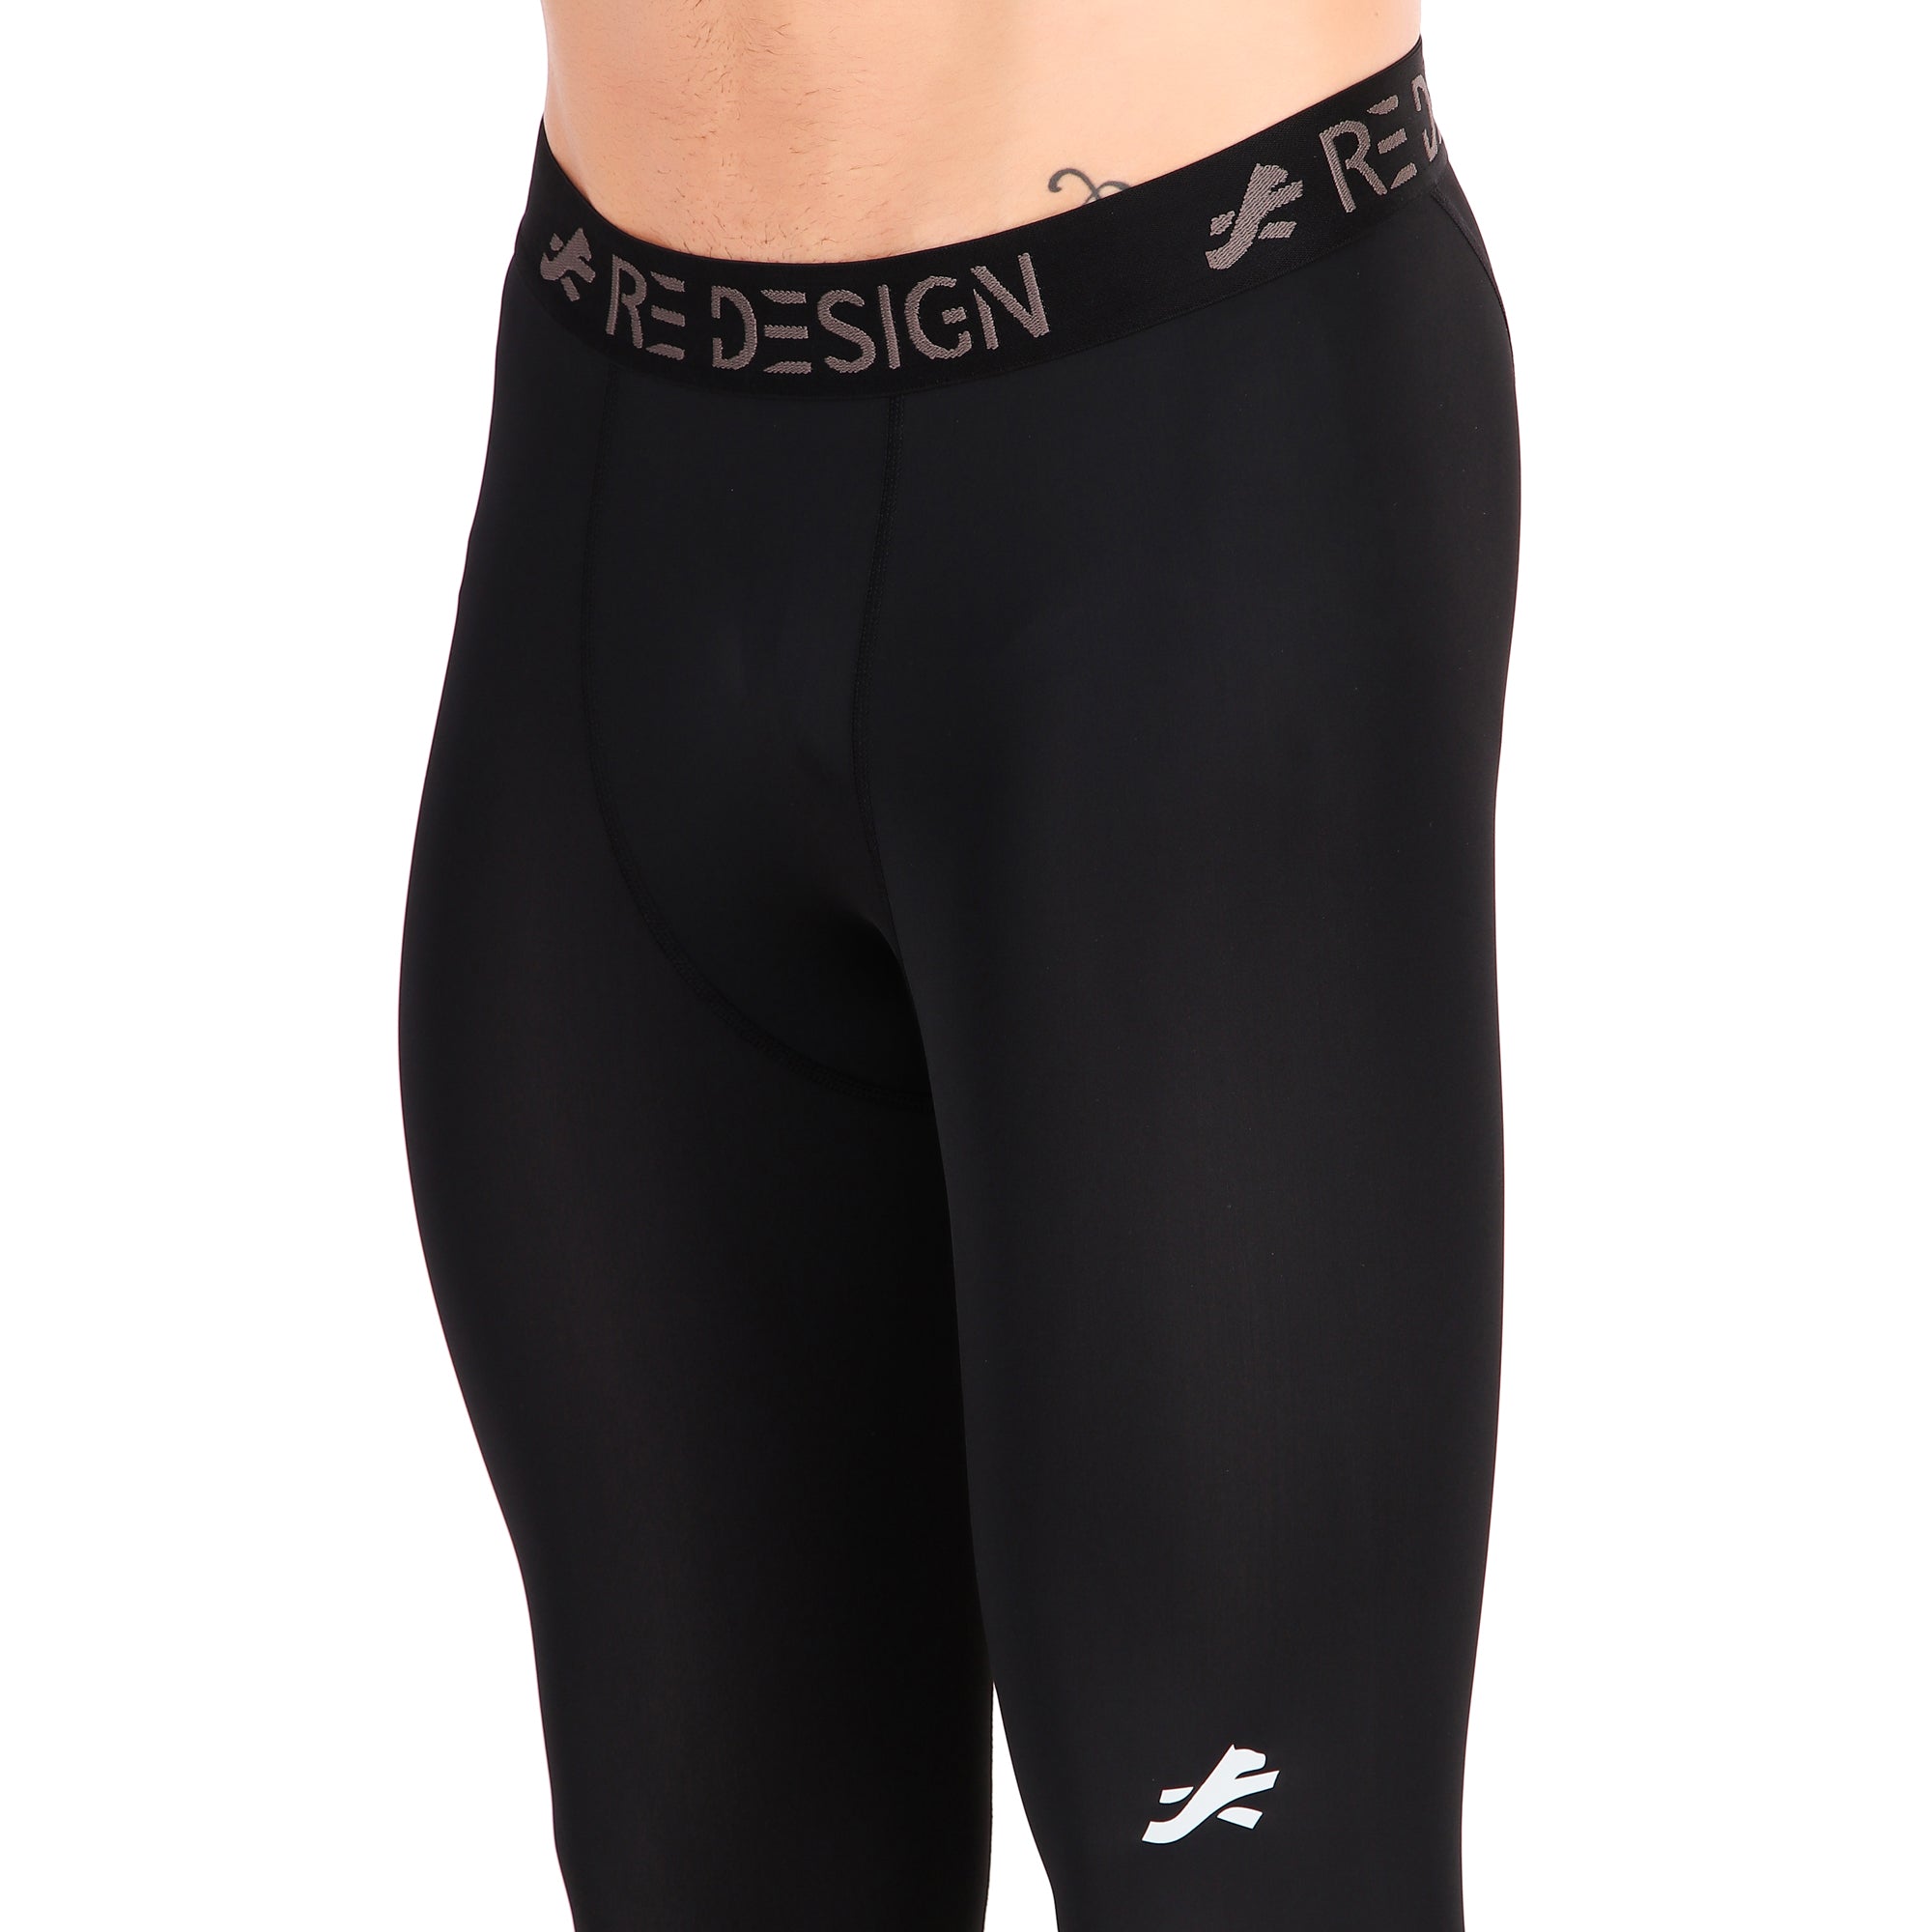 Nylon Compression Pant and Full Tights For Men (Black)